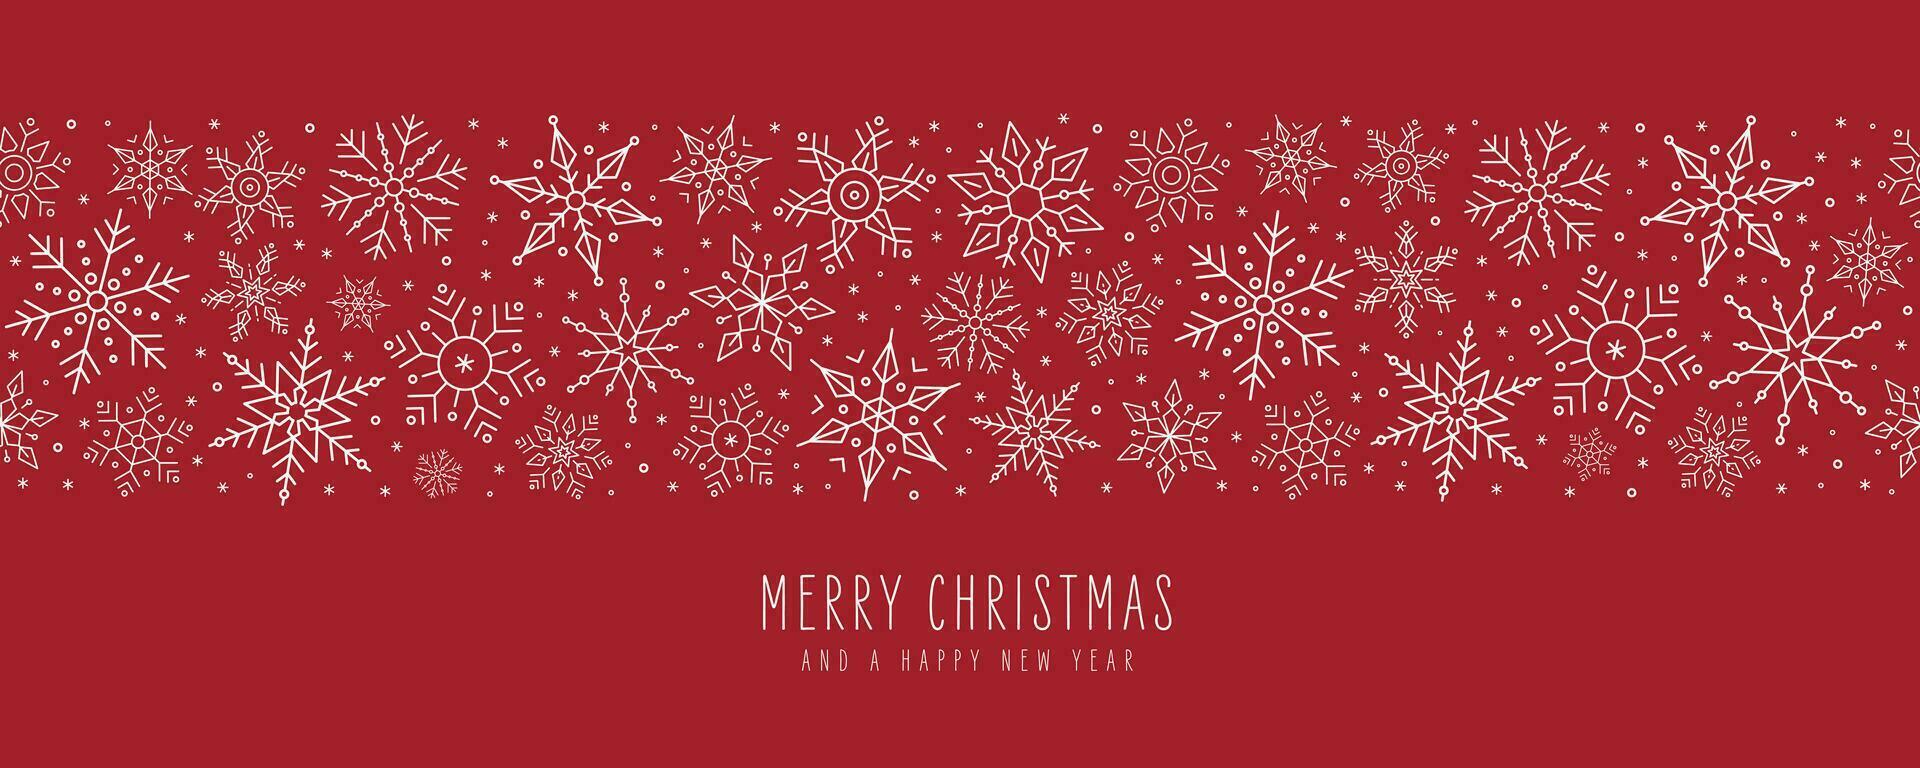 Merry Christmas greetings card snowflakes banner red background vector